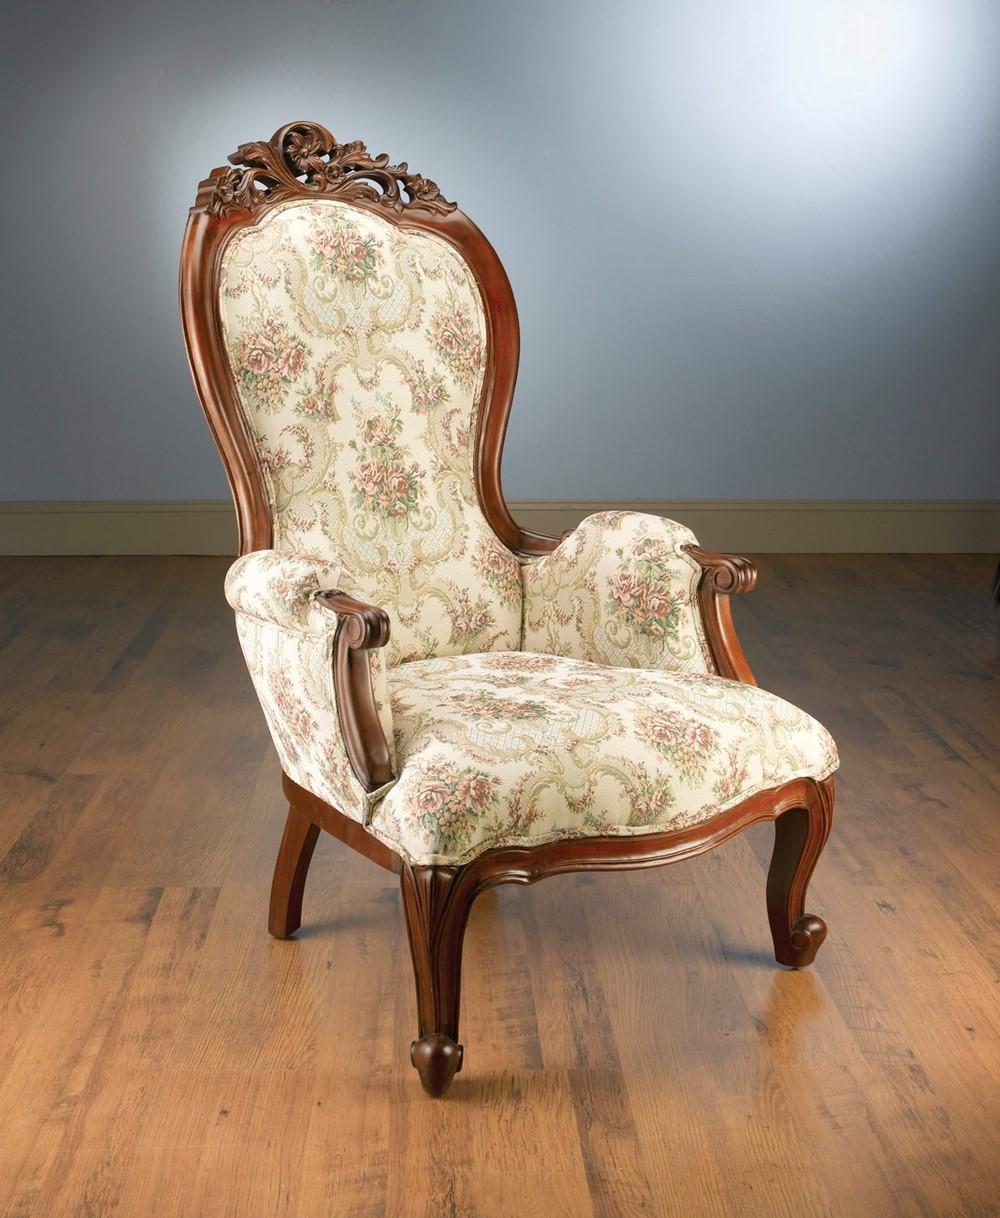 Classic, Traditional Dining Arm Chair 31040 AA-31040-DCH-Set-2 in Medium Brown, White Fabric